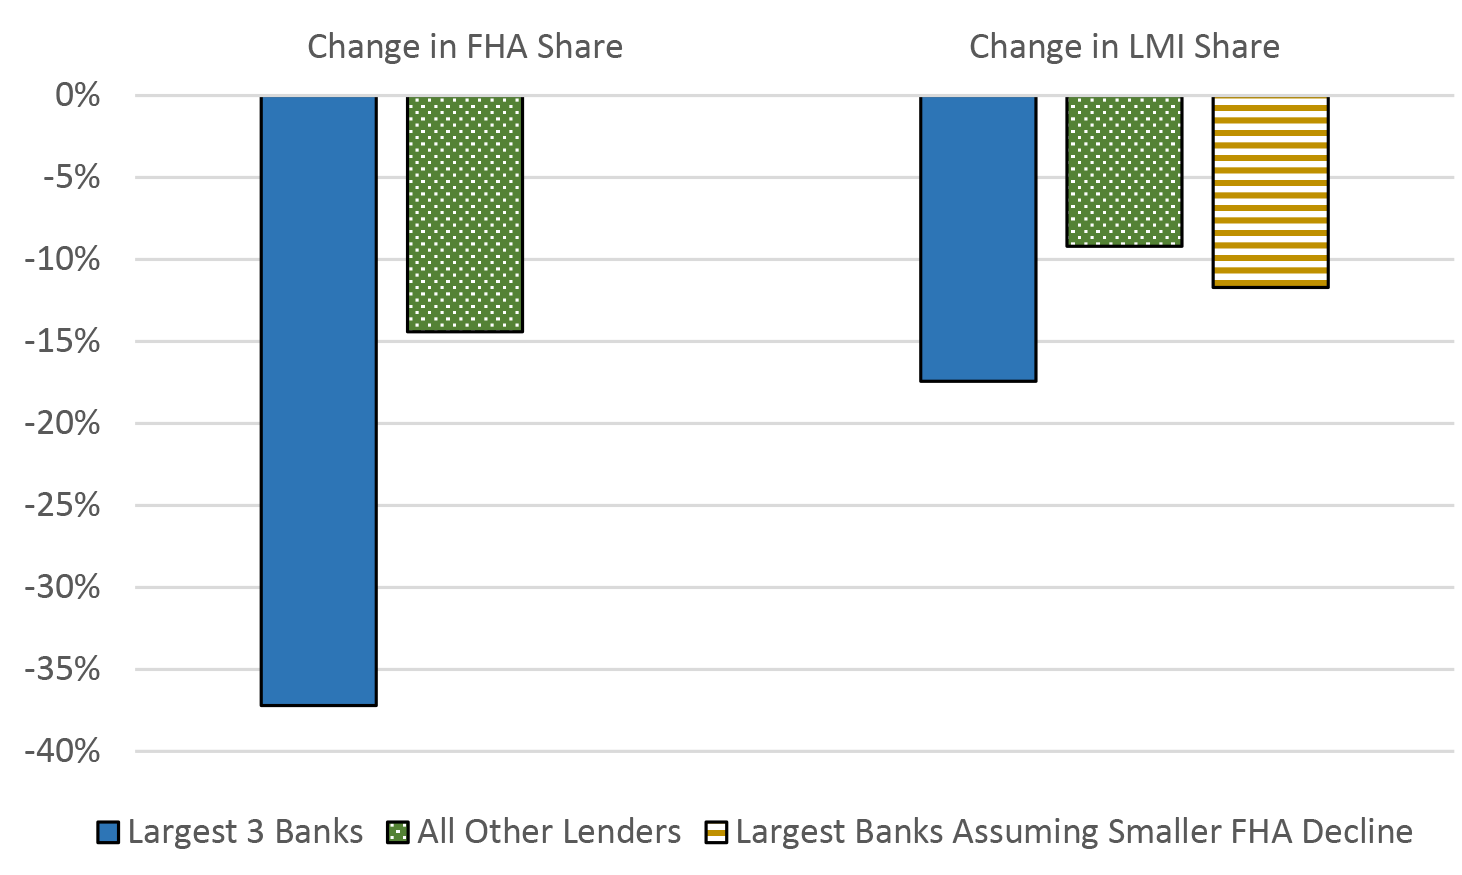 Figure 4: Changes in FHA and LMI Shares, 2010-2016. See accessible link for data.